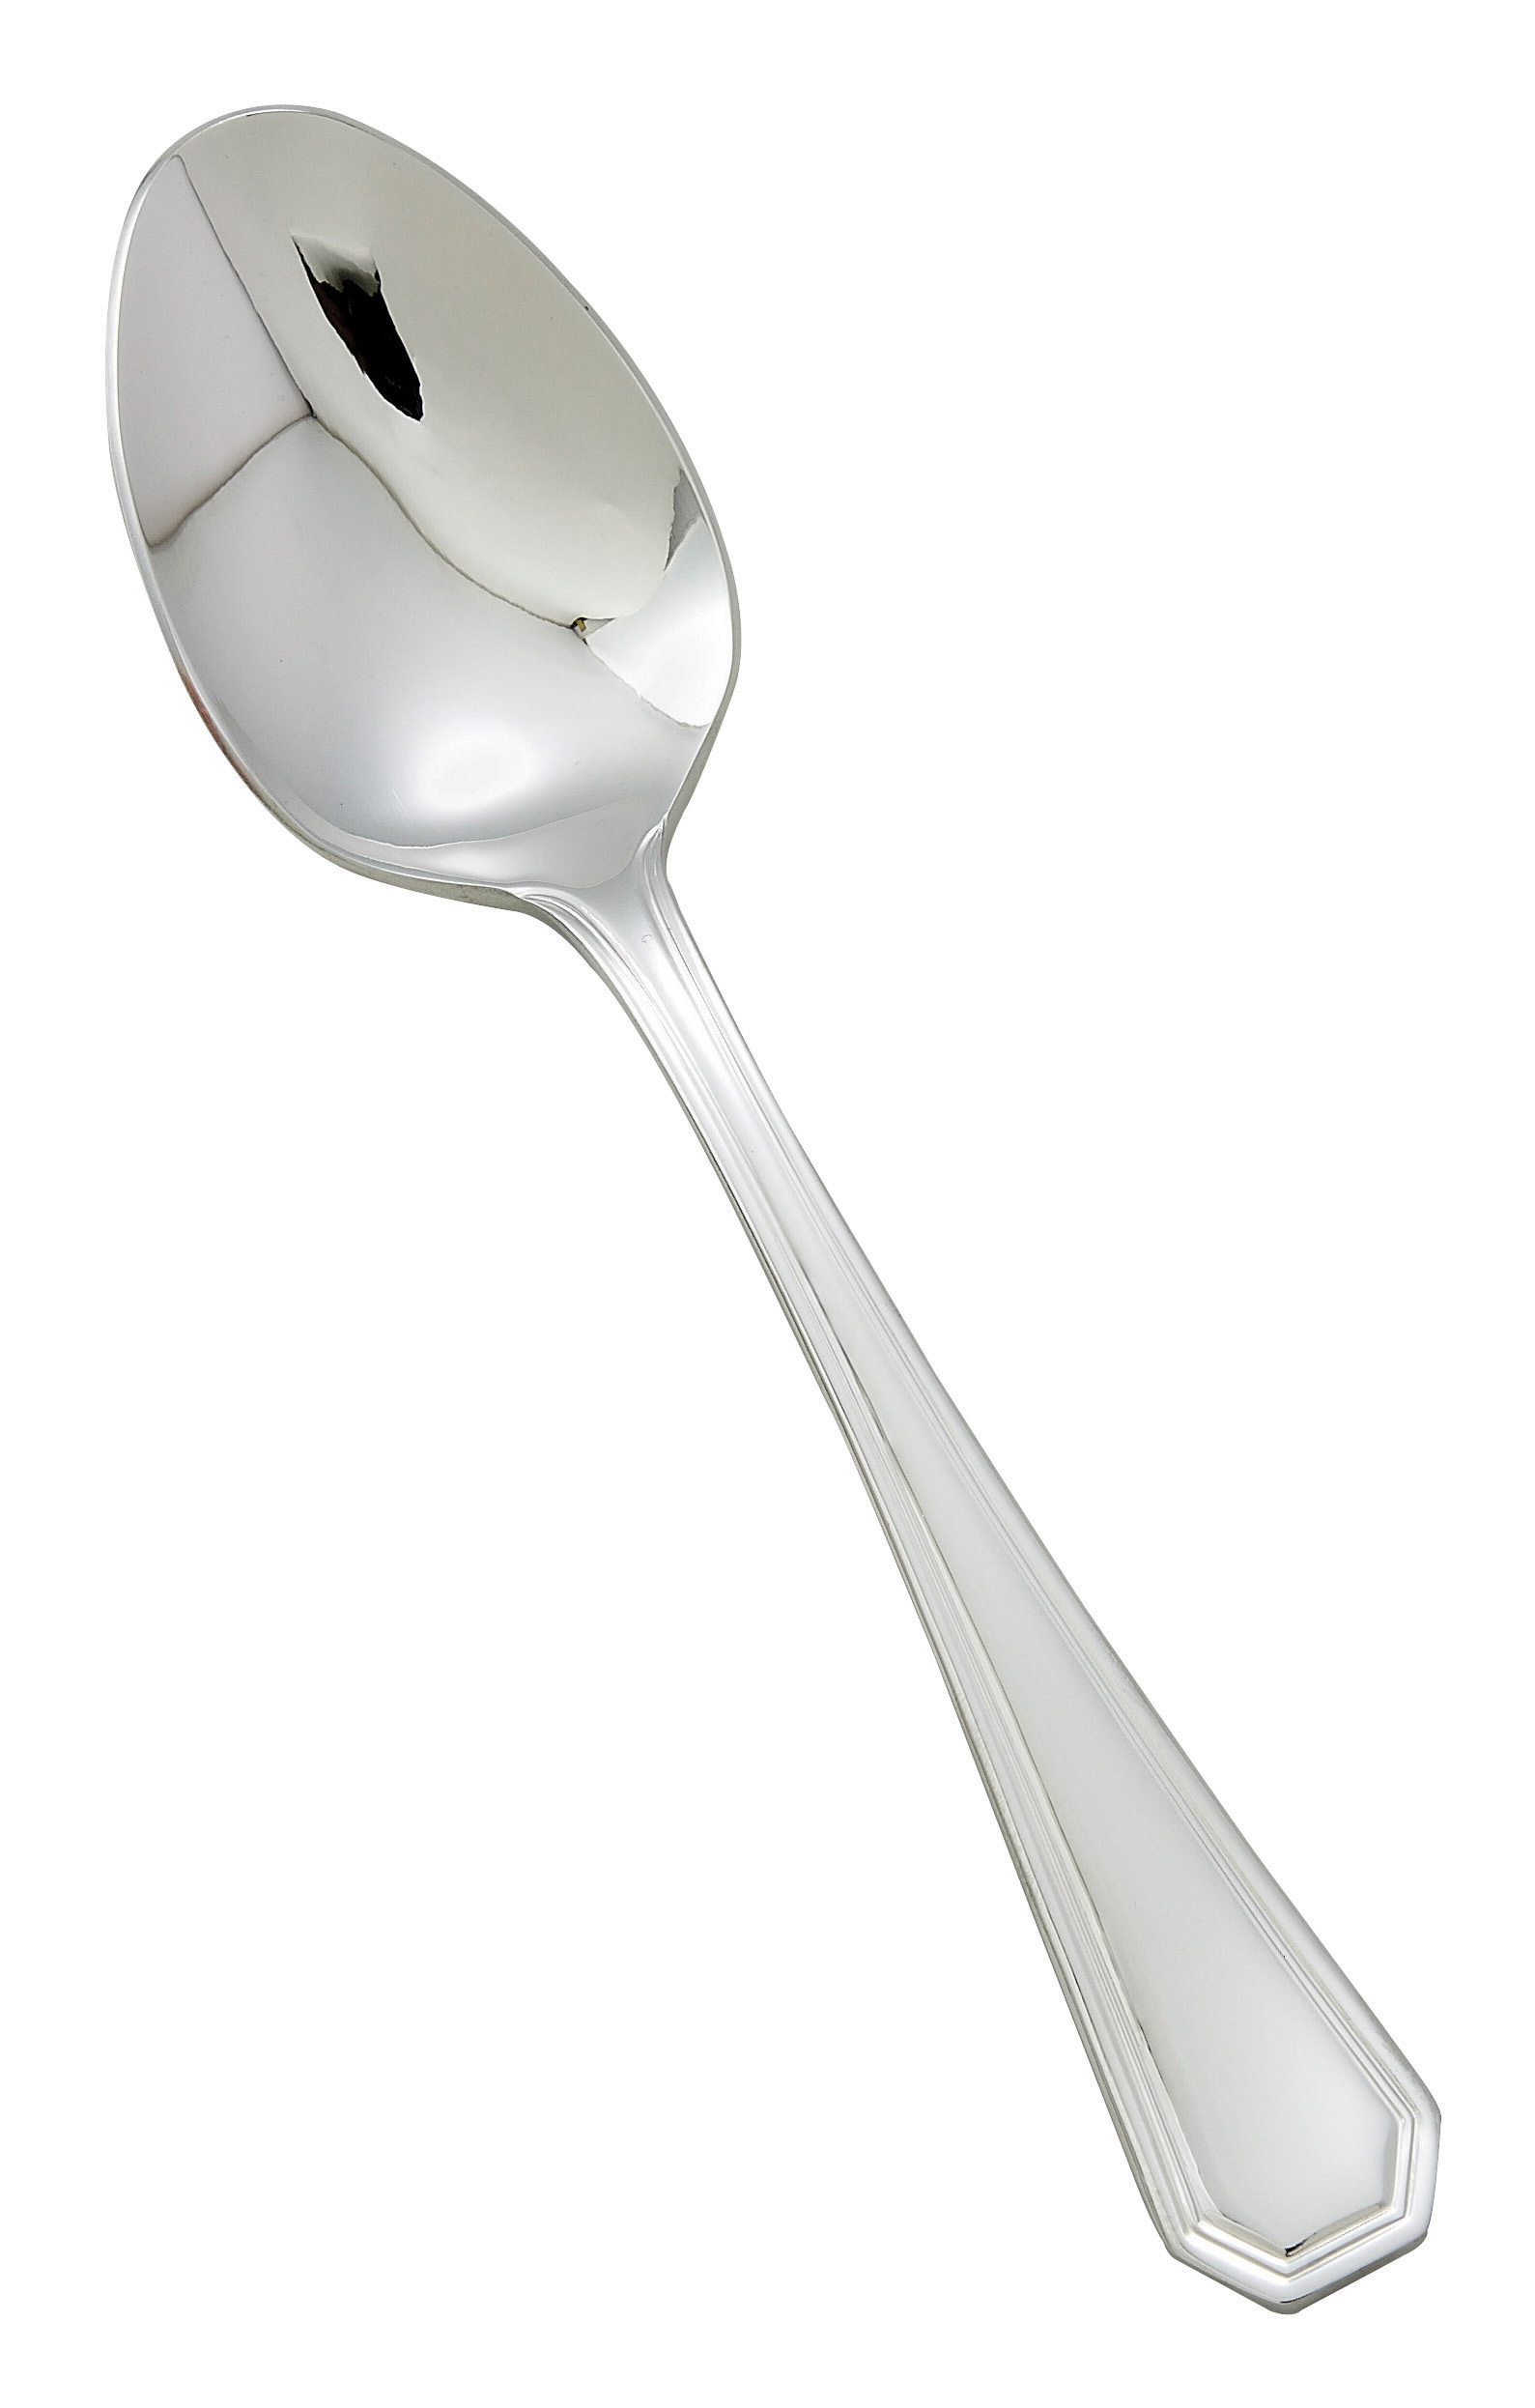 Dinner Spoon, 18/8 stainless steel, extra heavy weight,